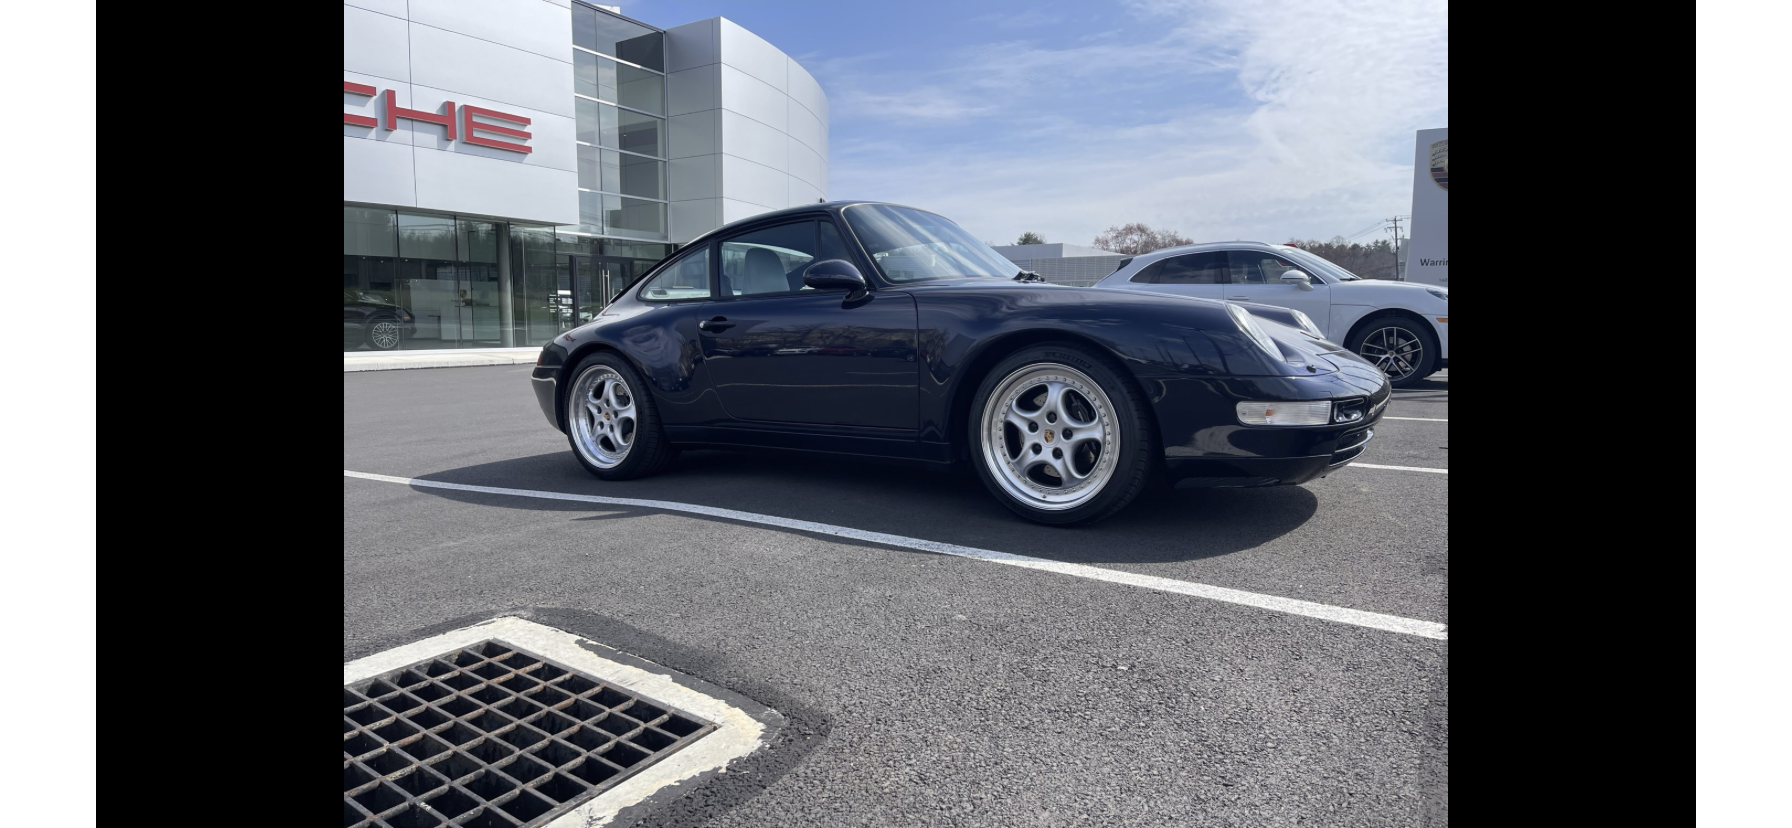 1995 Porsche 911 -  - Used - VIN Wpoaa2994ss322646 - 42,000 Miles - 6 cyl - 2WD - Manual - Coupe - Blue - Doylestown, PA 18902, United States